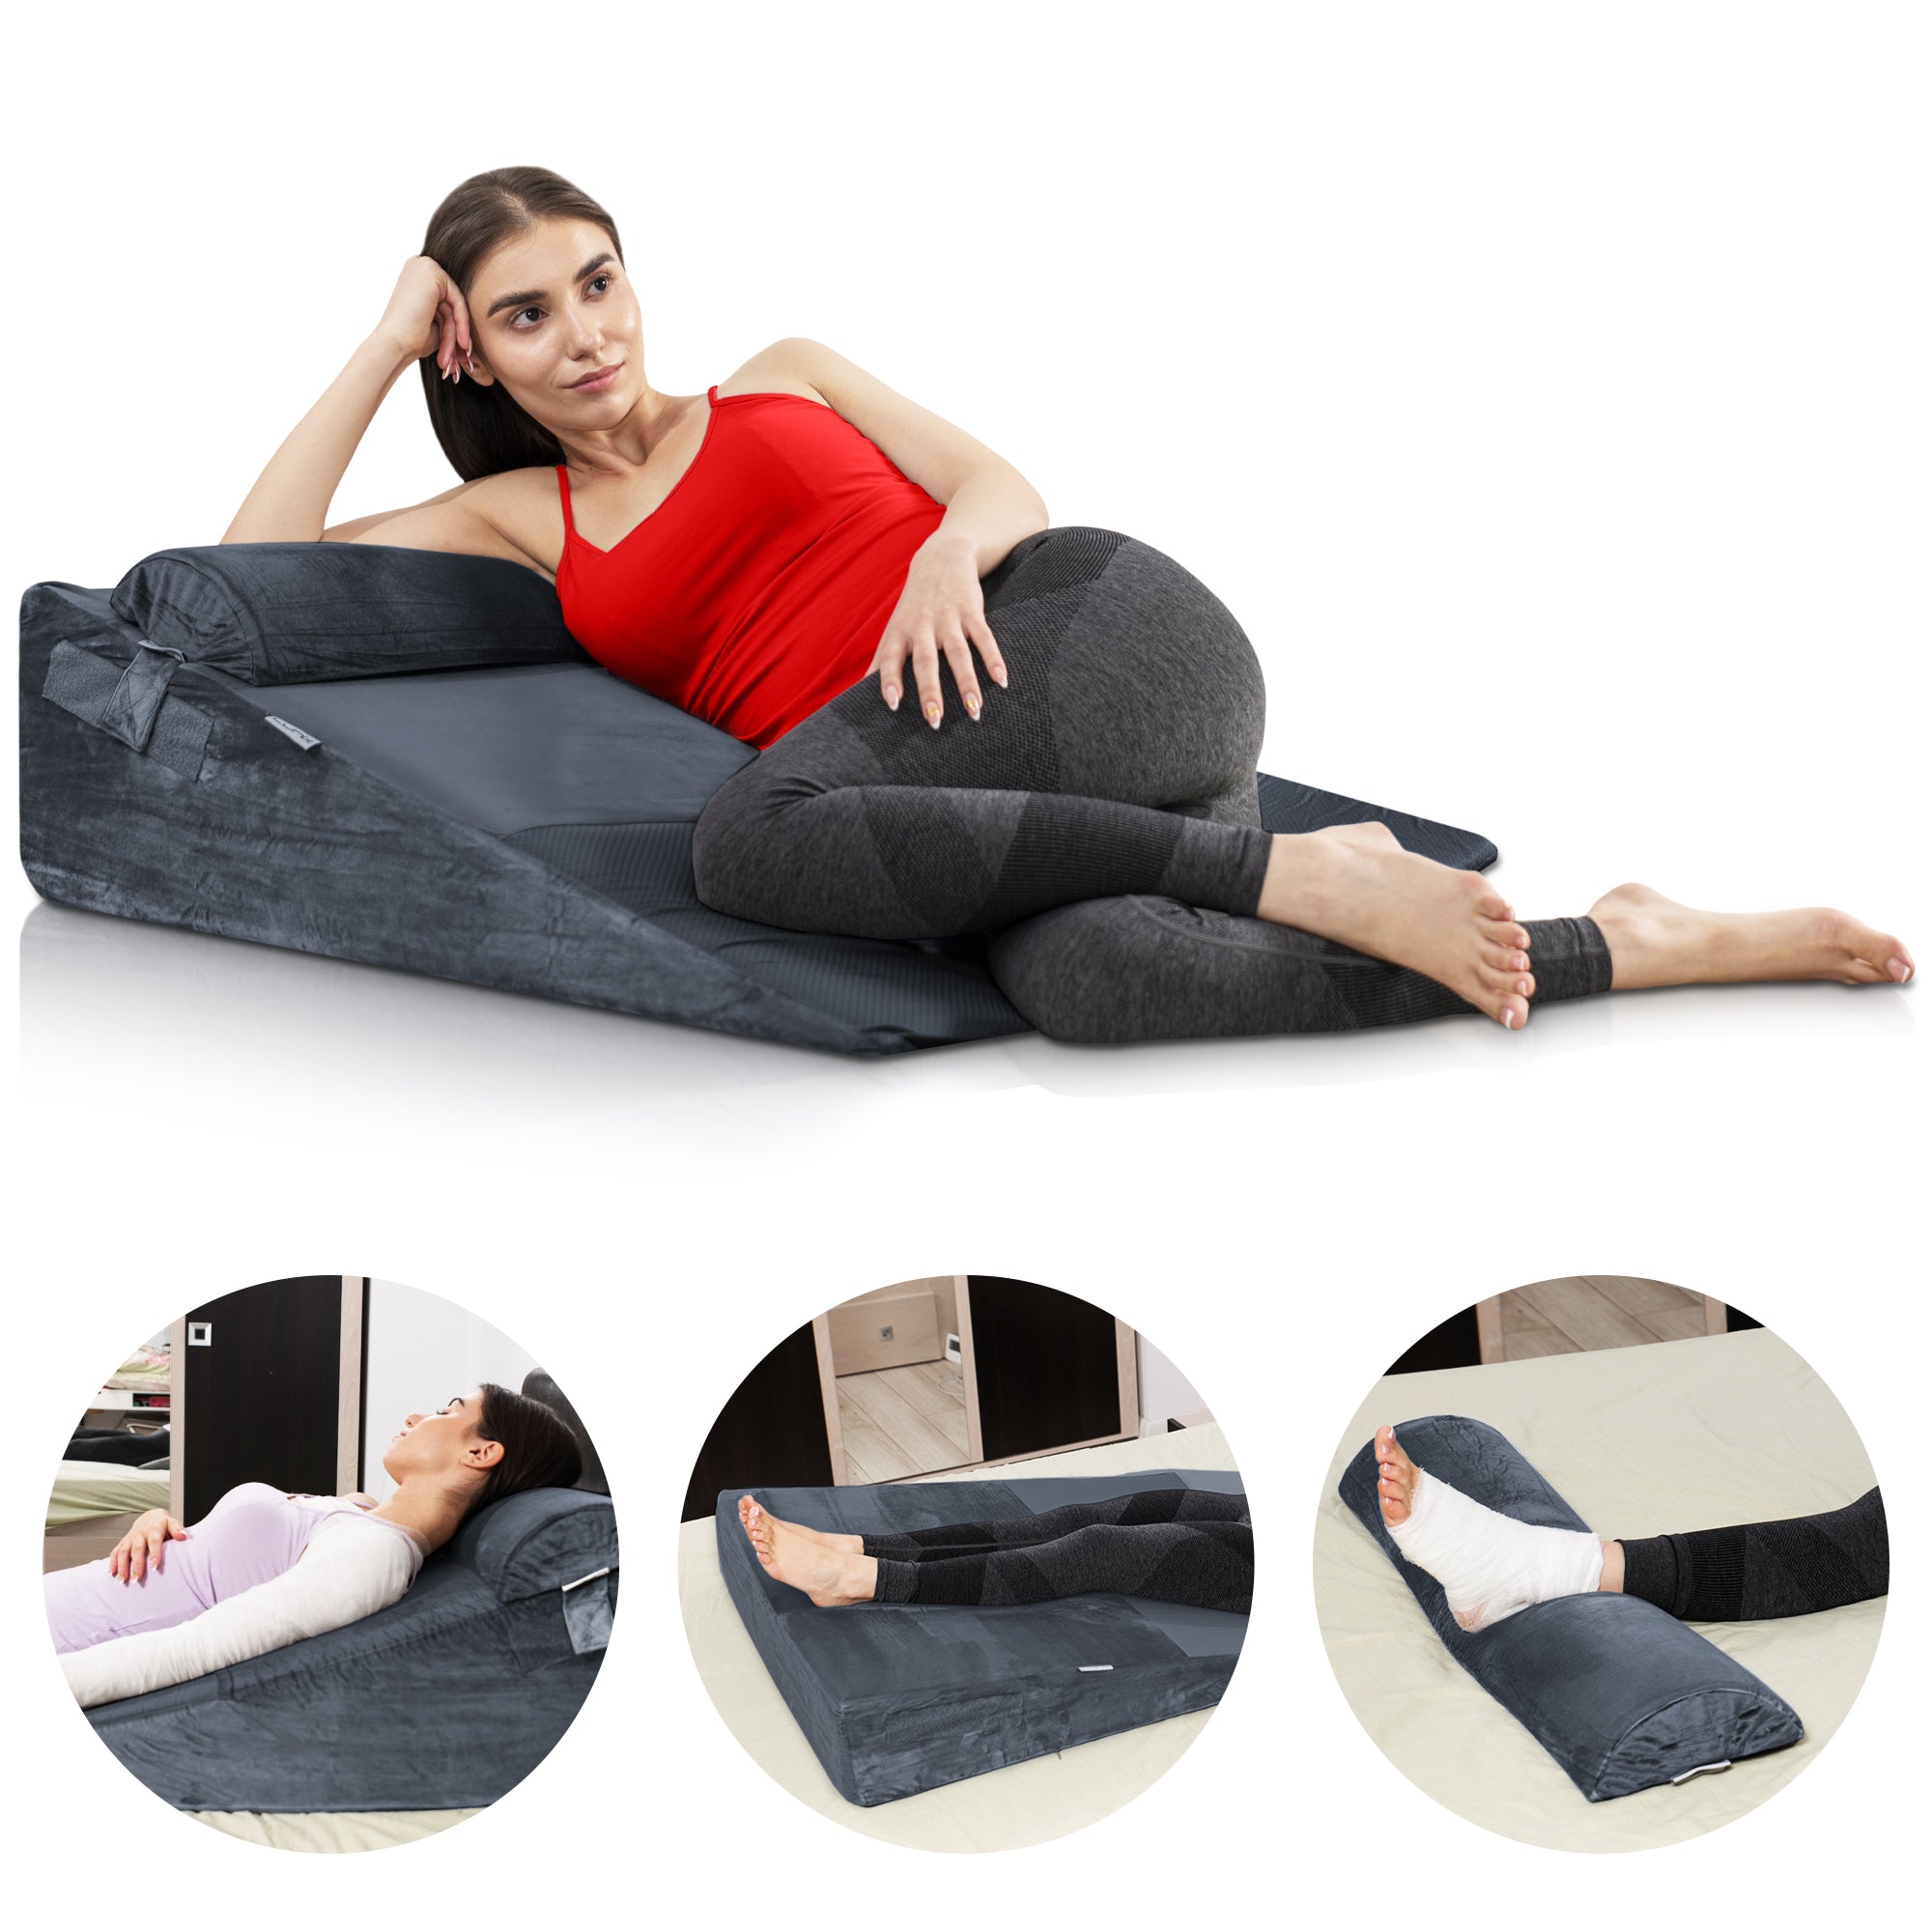 LX14 1pc Wedge Knee Pillow